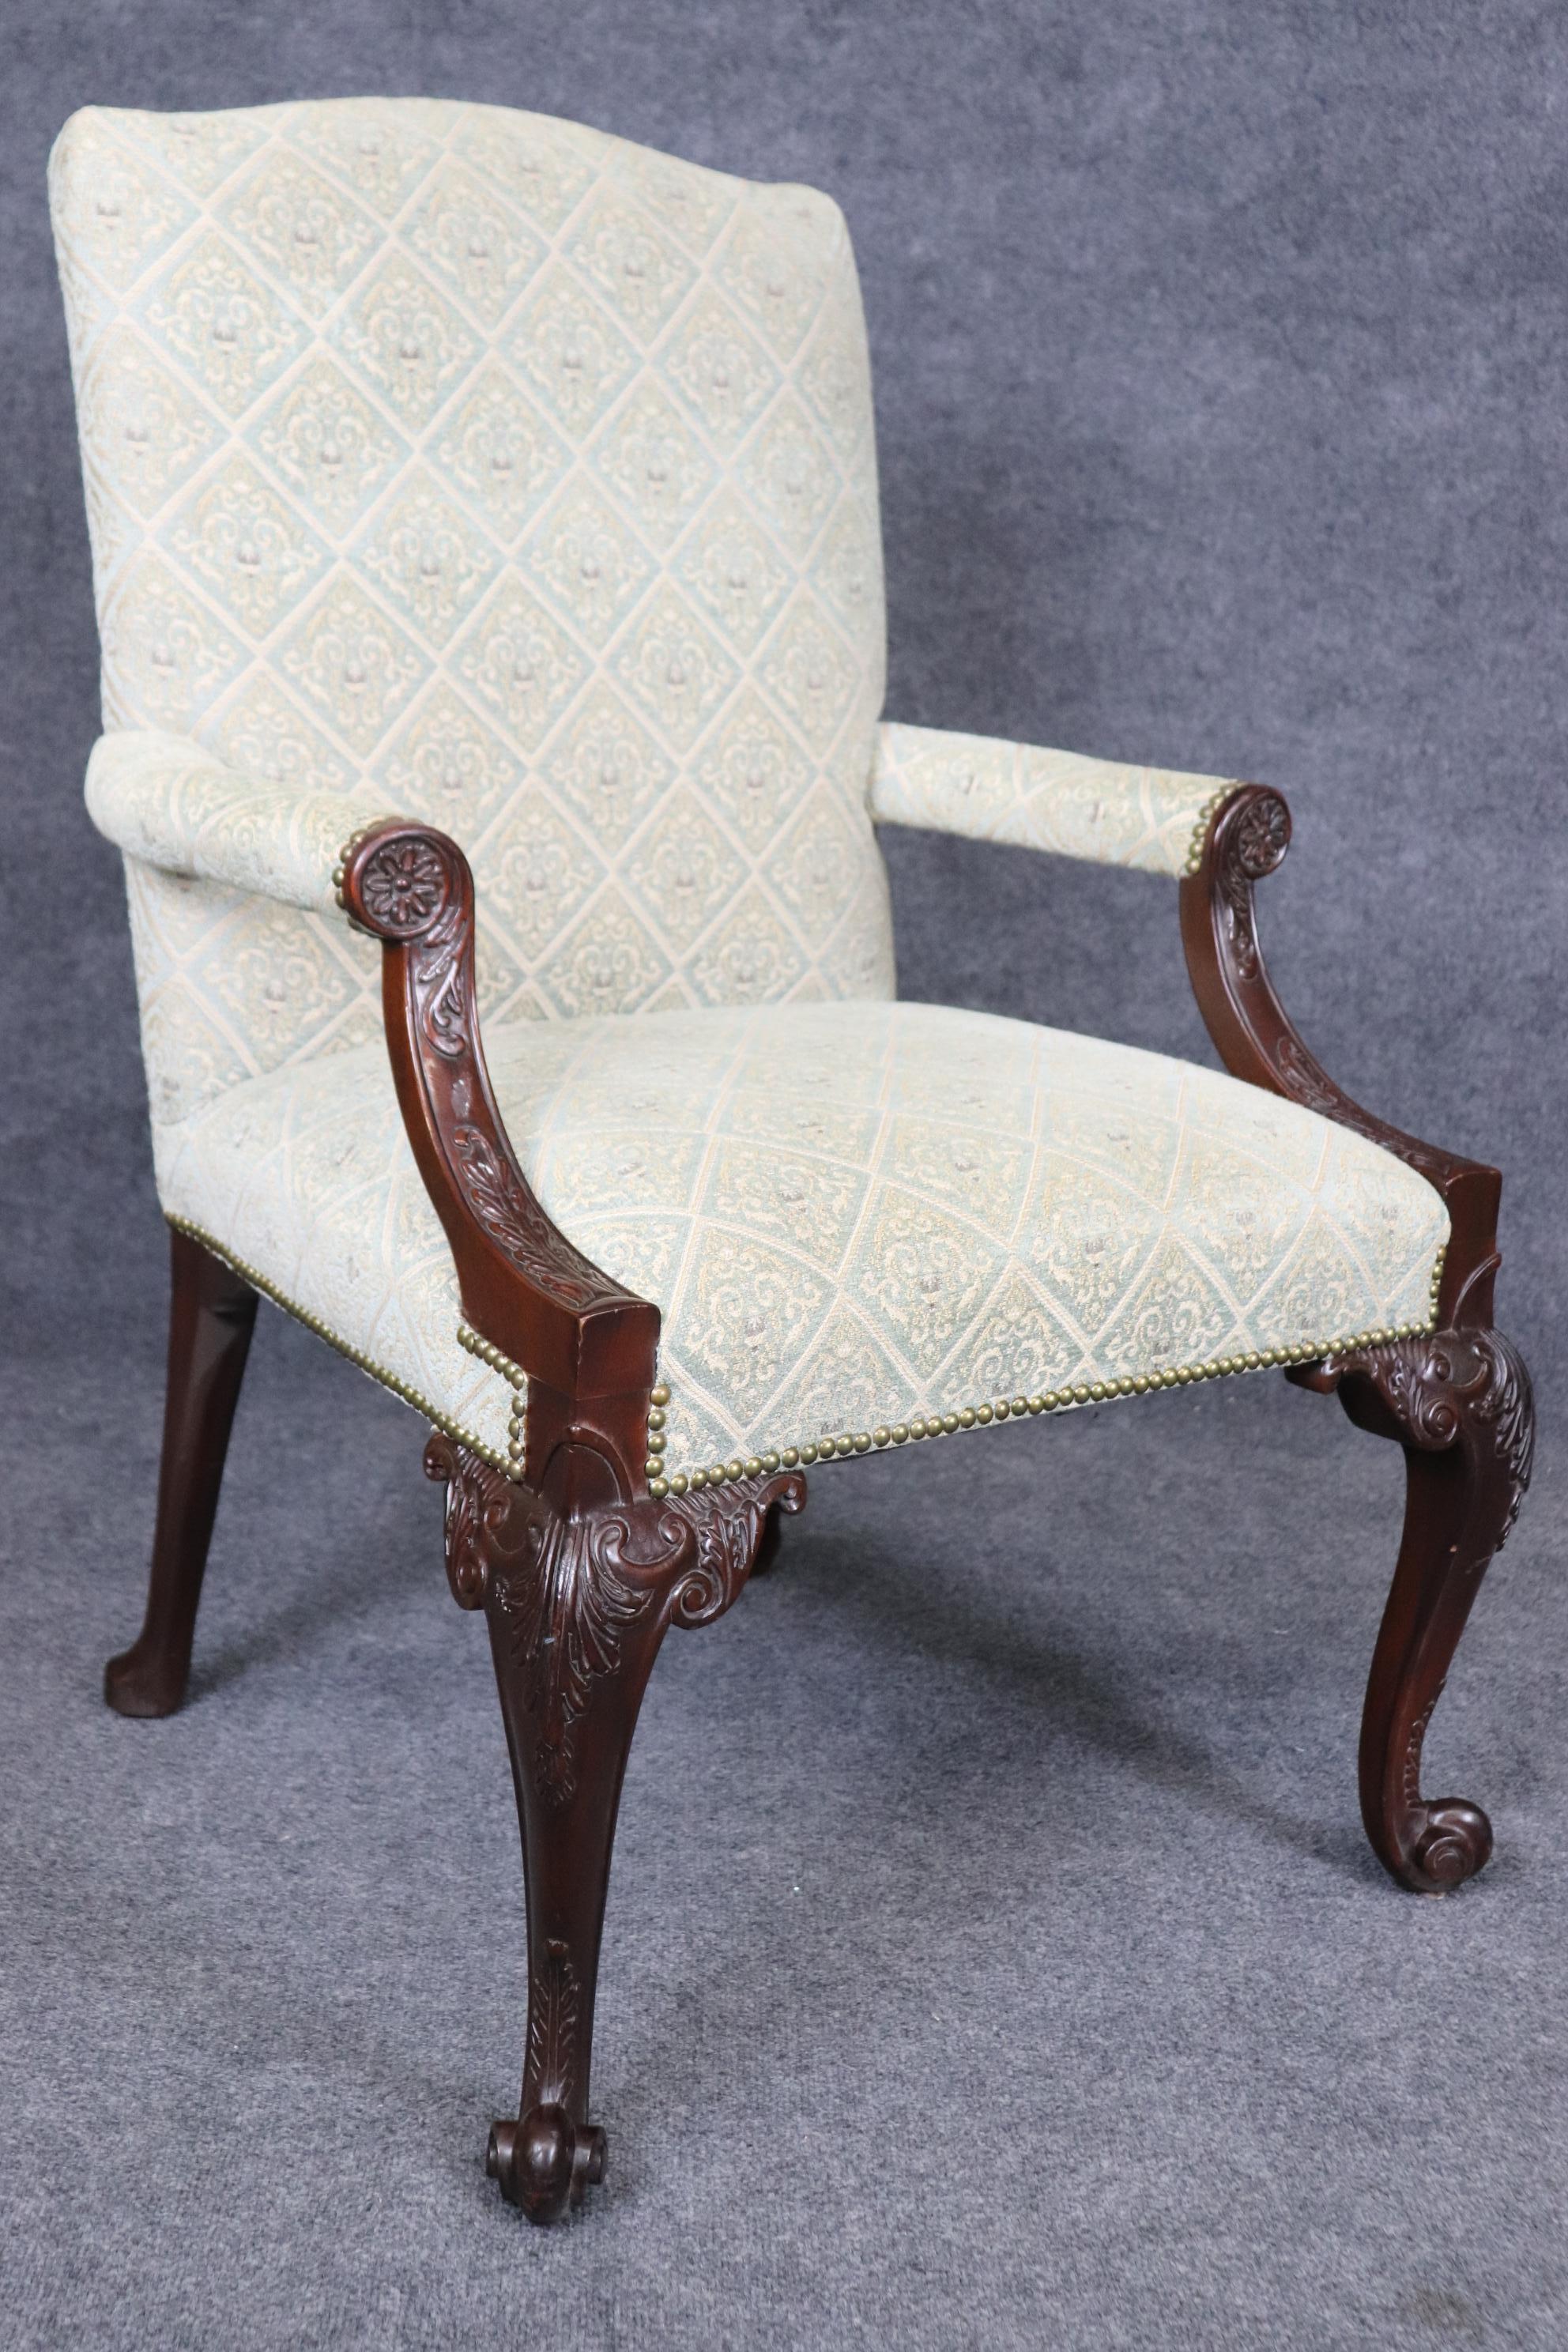 This is a gorgeous and large scale pair of armchairs. The chairs are beautifully carved mahogany with age-appropriate signs of wear and use on the finish and may show signs of use on upholstery as the upholstery is older. Measures 40 tall x 27 wide